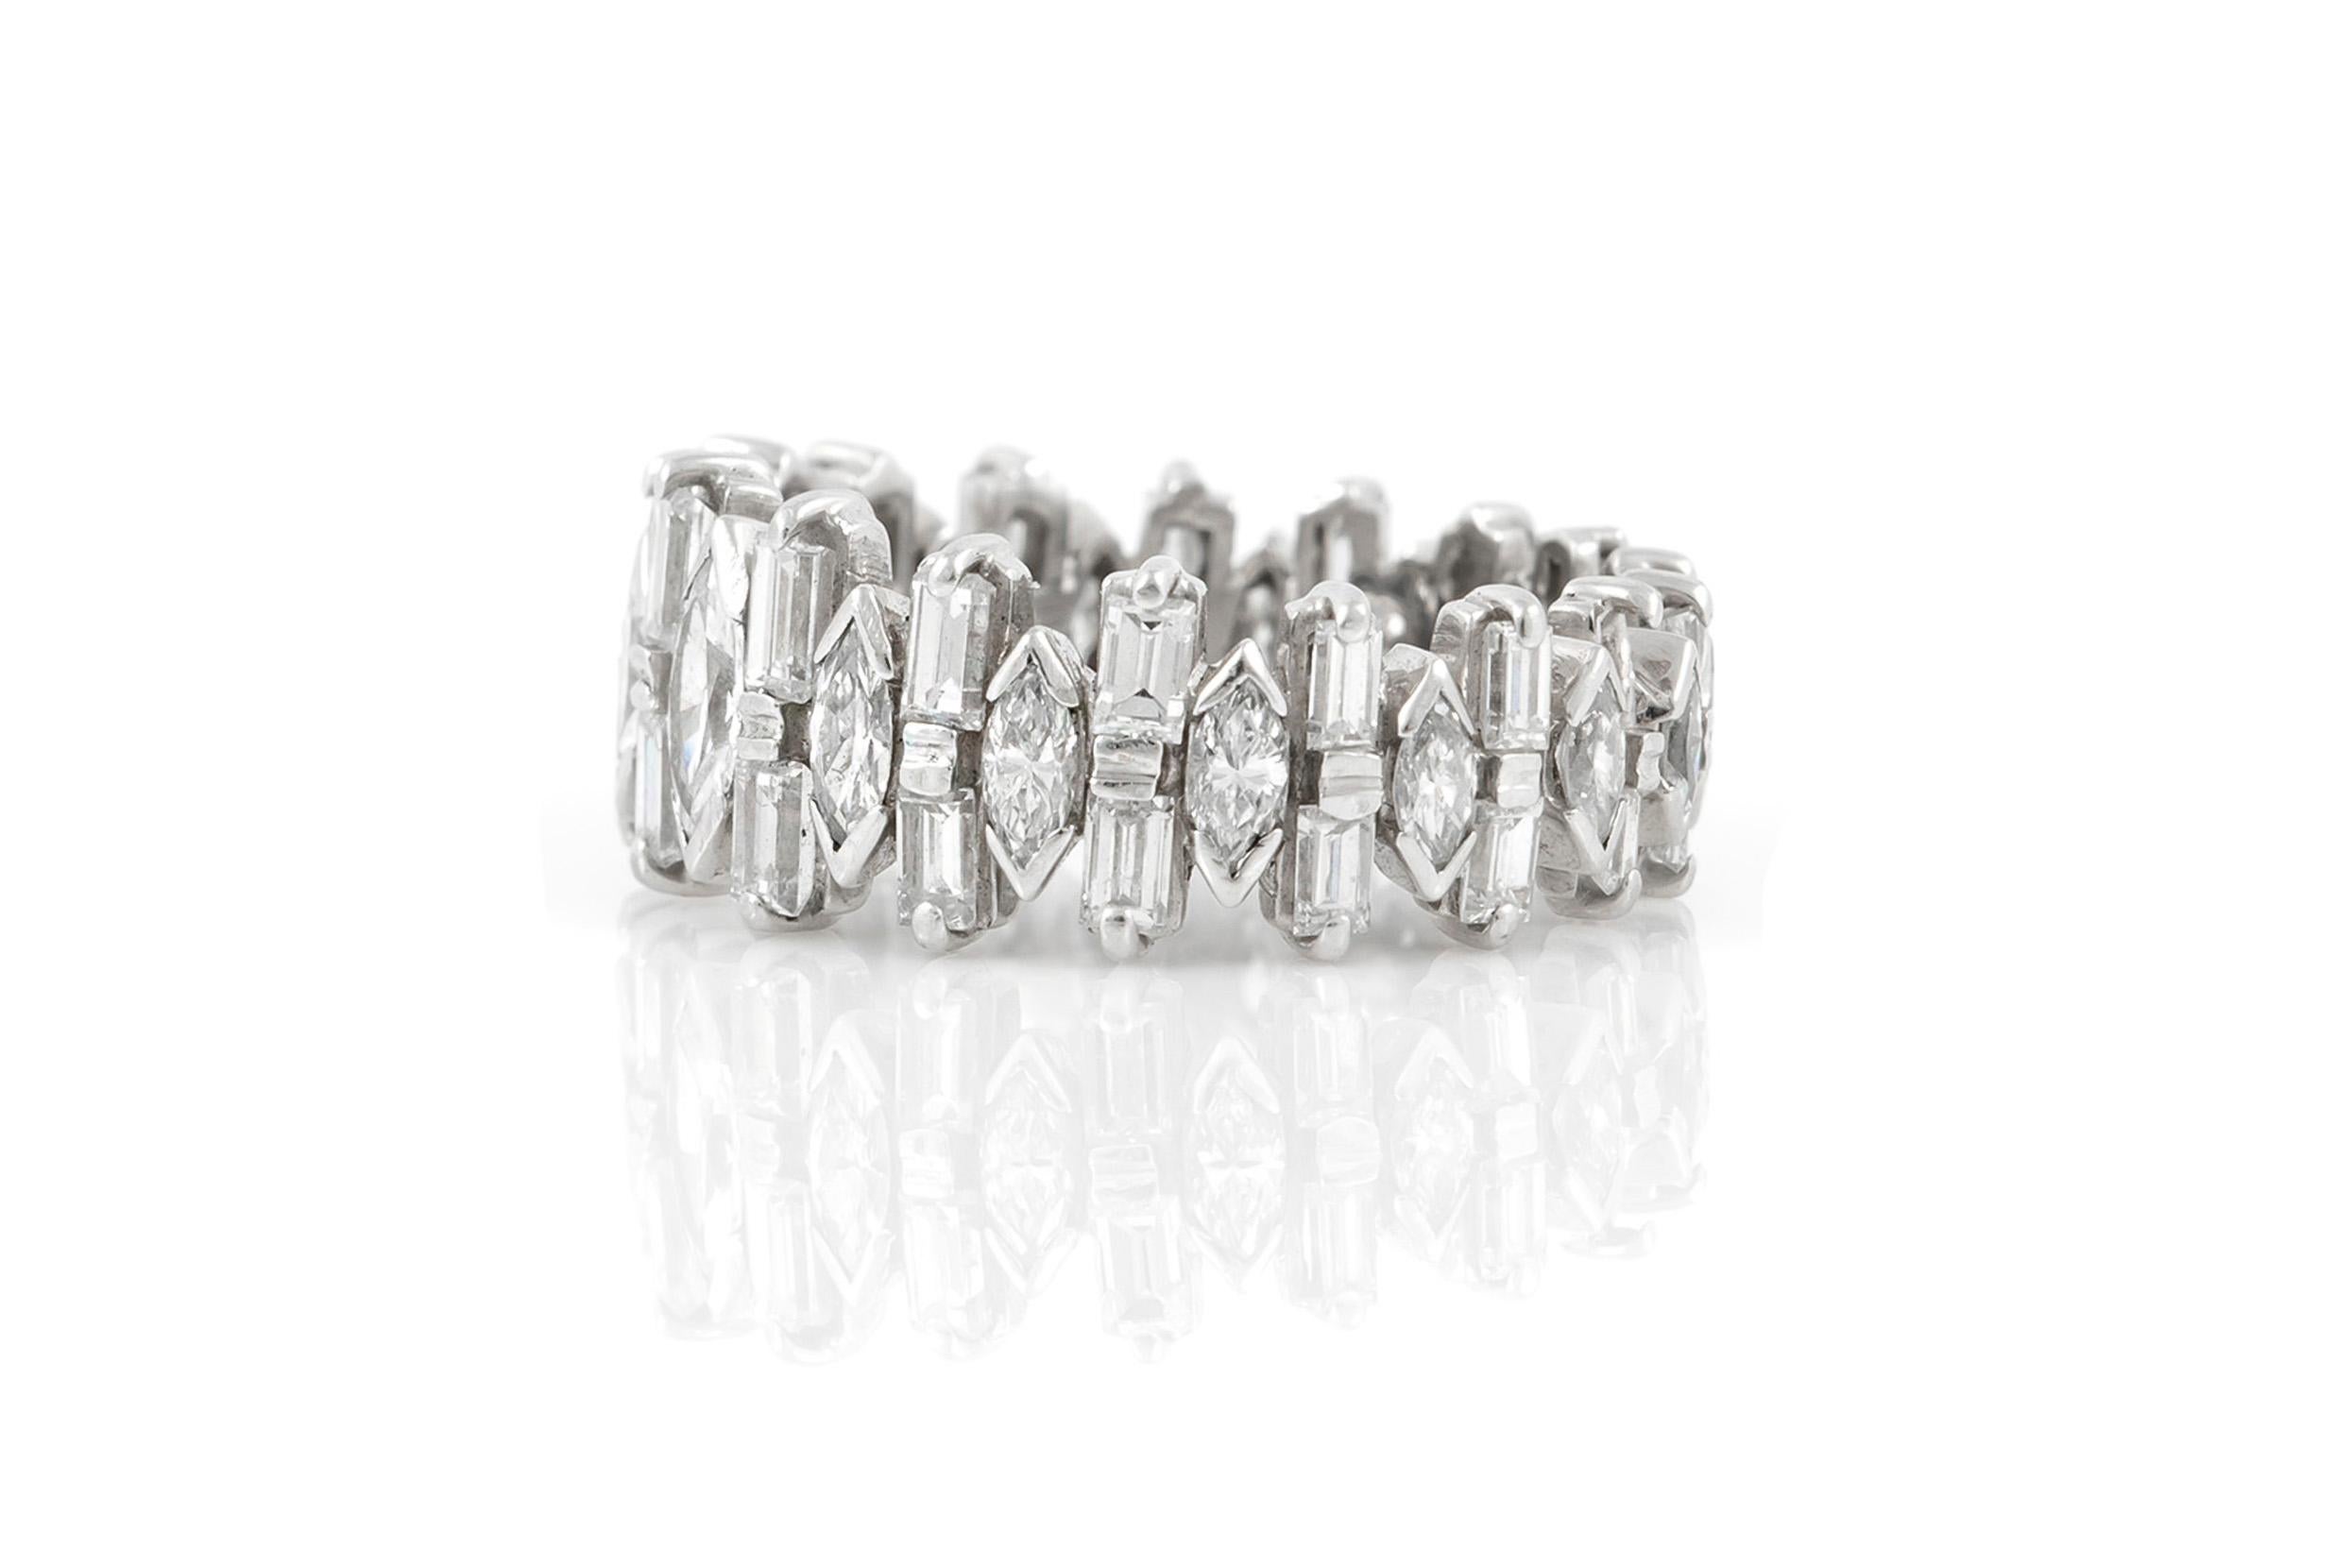 Finely crafted Platinum ring with Baguette-cut Diamonds weighing approximately 2.00 carats and Marquise-cut Diamonds weighing approximately 3.00 carats. 